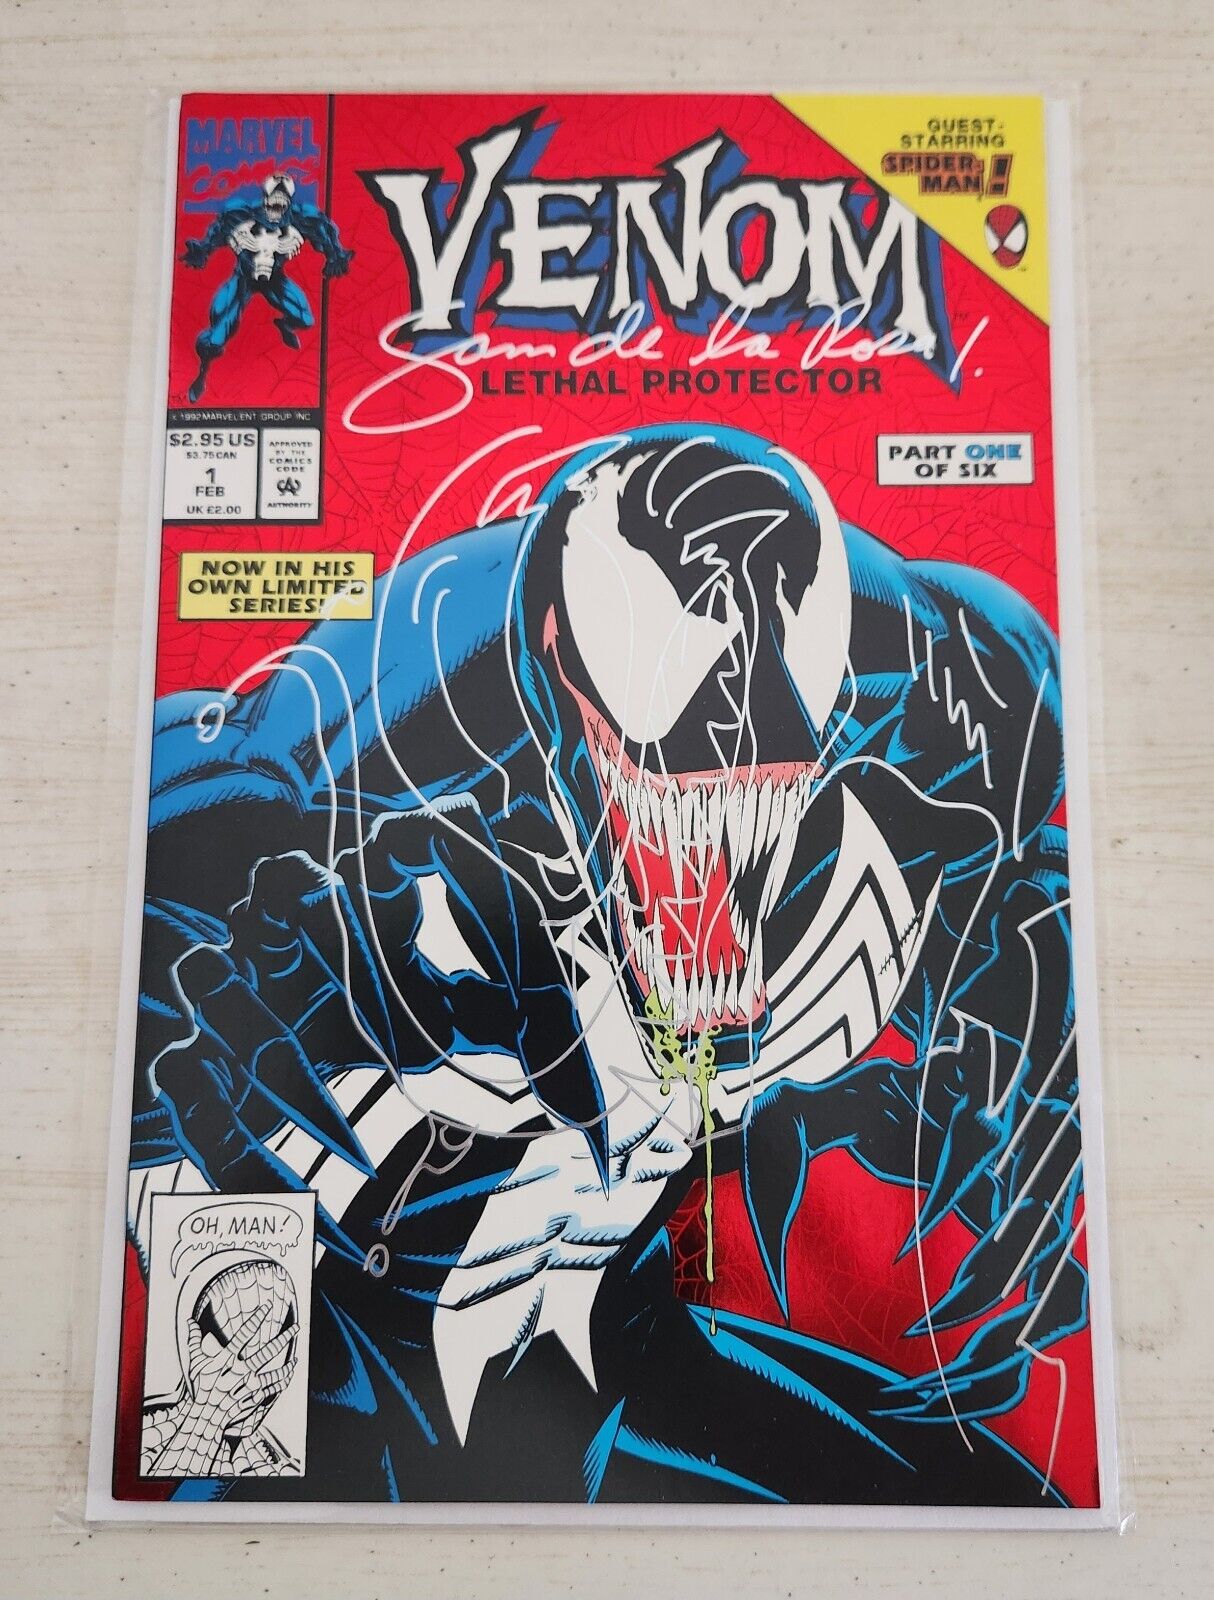 Venom Lethal Protector 1 First Edition Signed And Sketched by Sam de la Rosa No